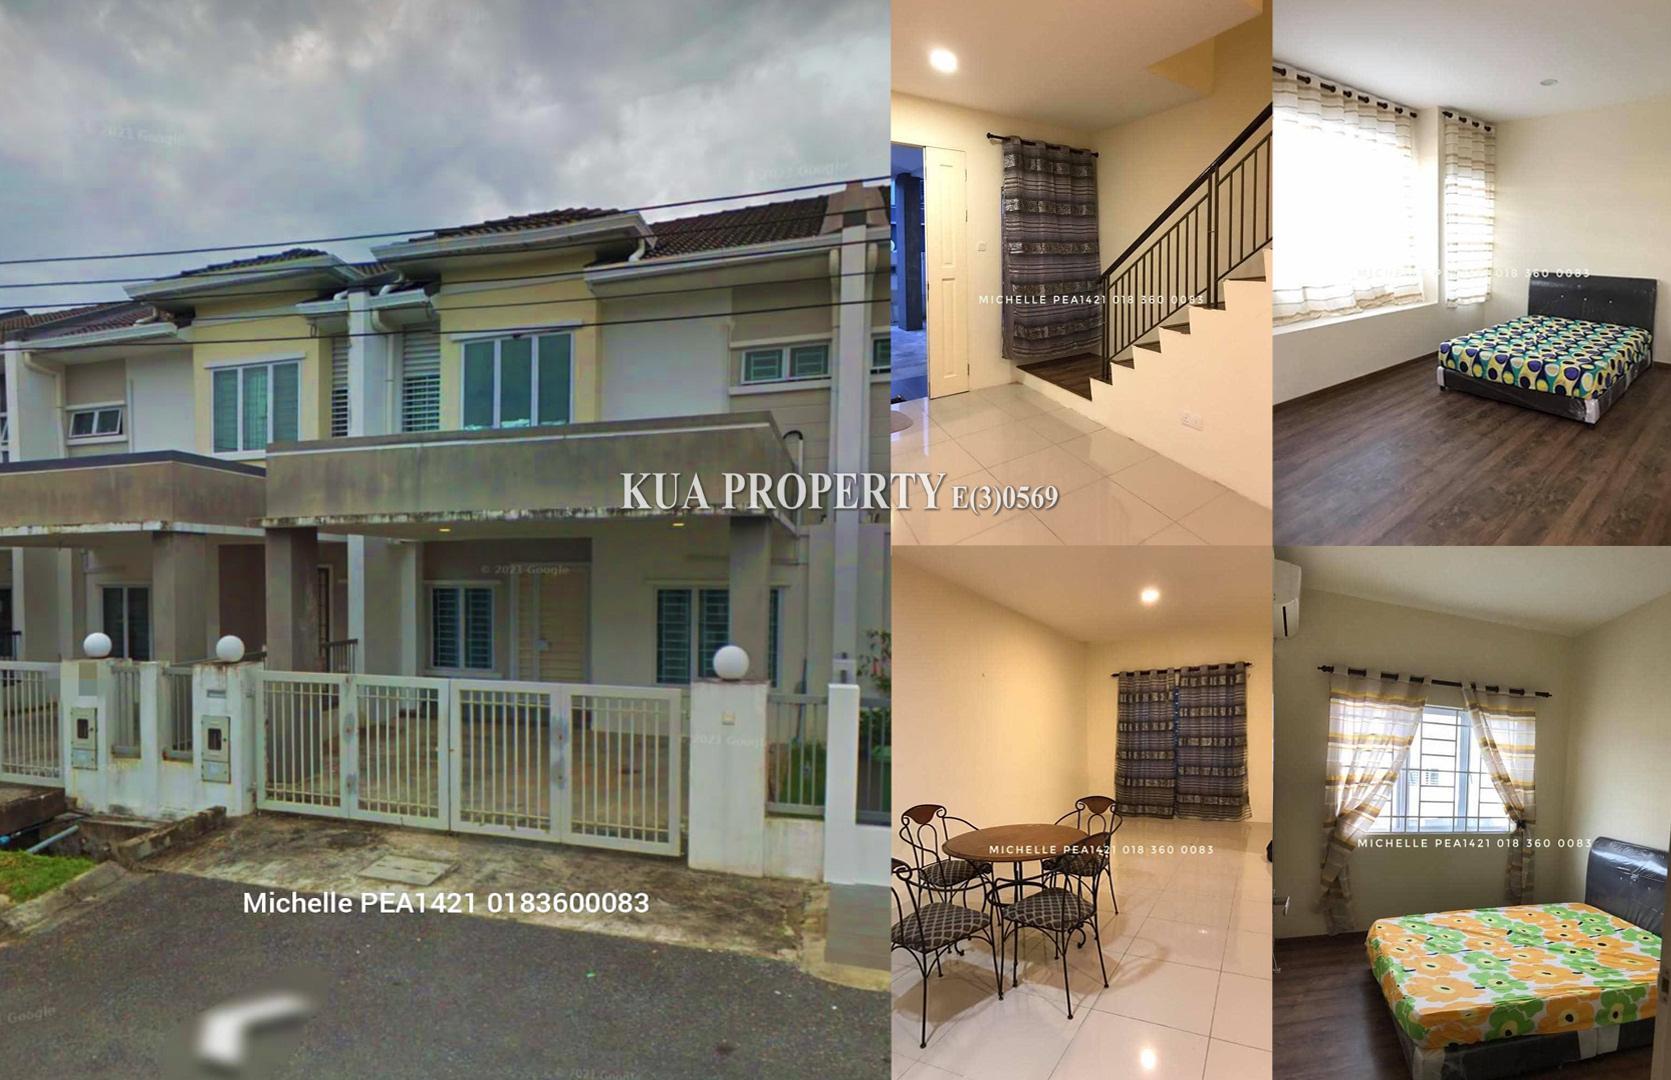 Double Storey Terrace intermediate House For Sale!at Tabuan Tranquility